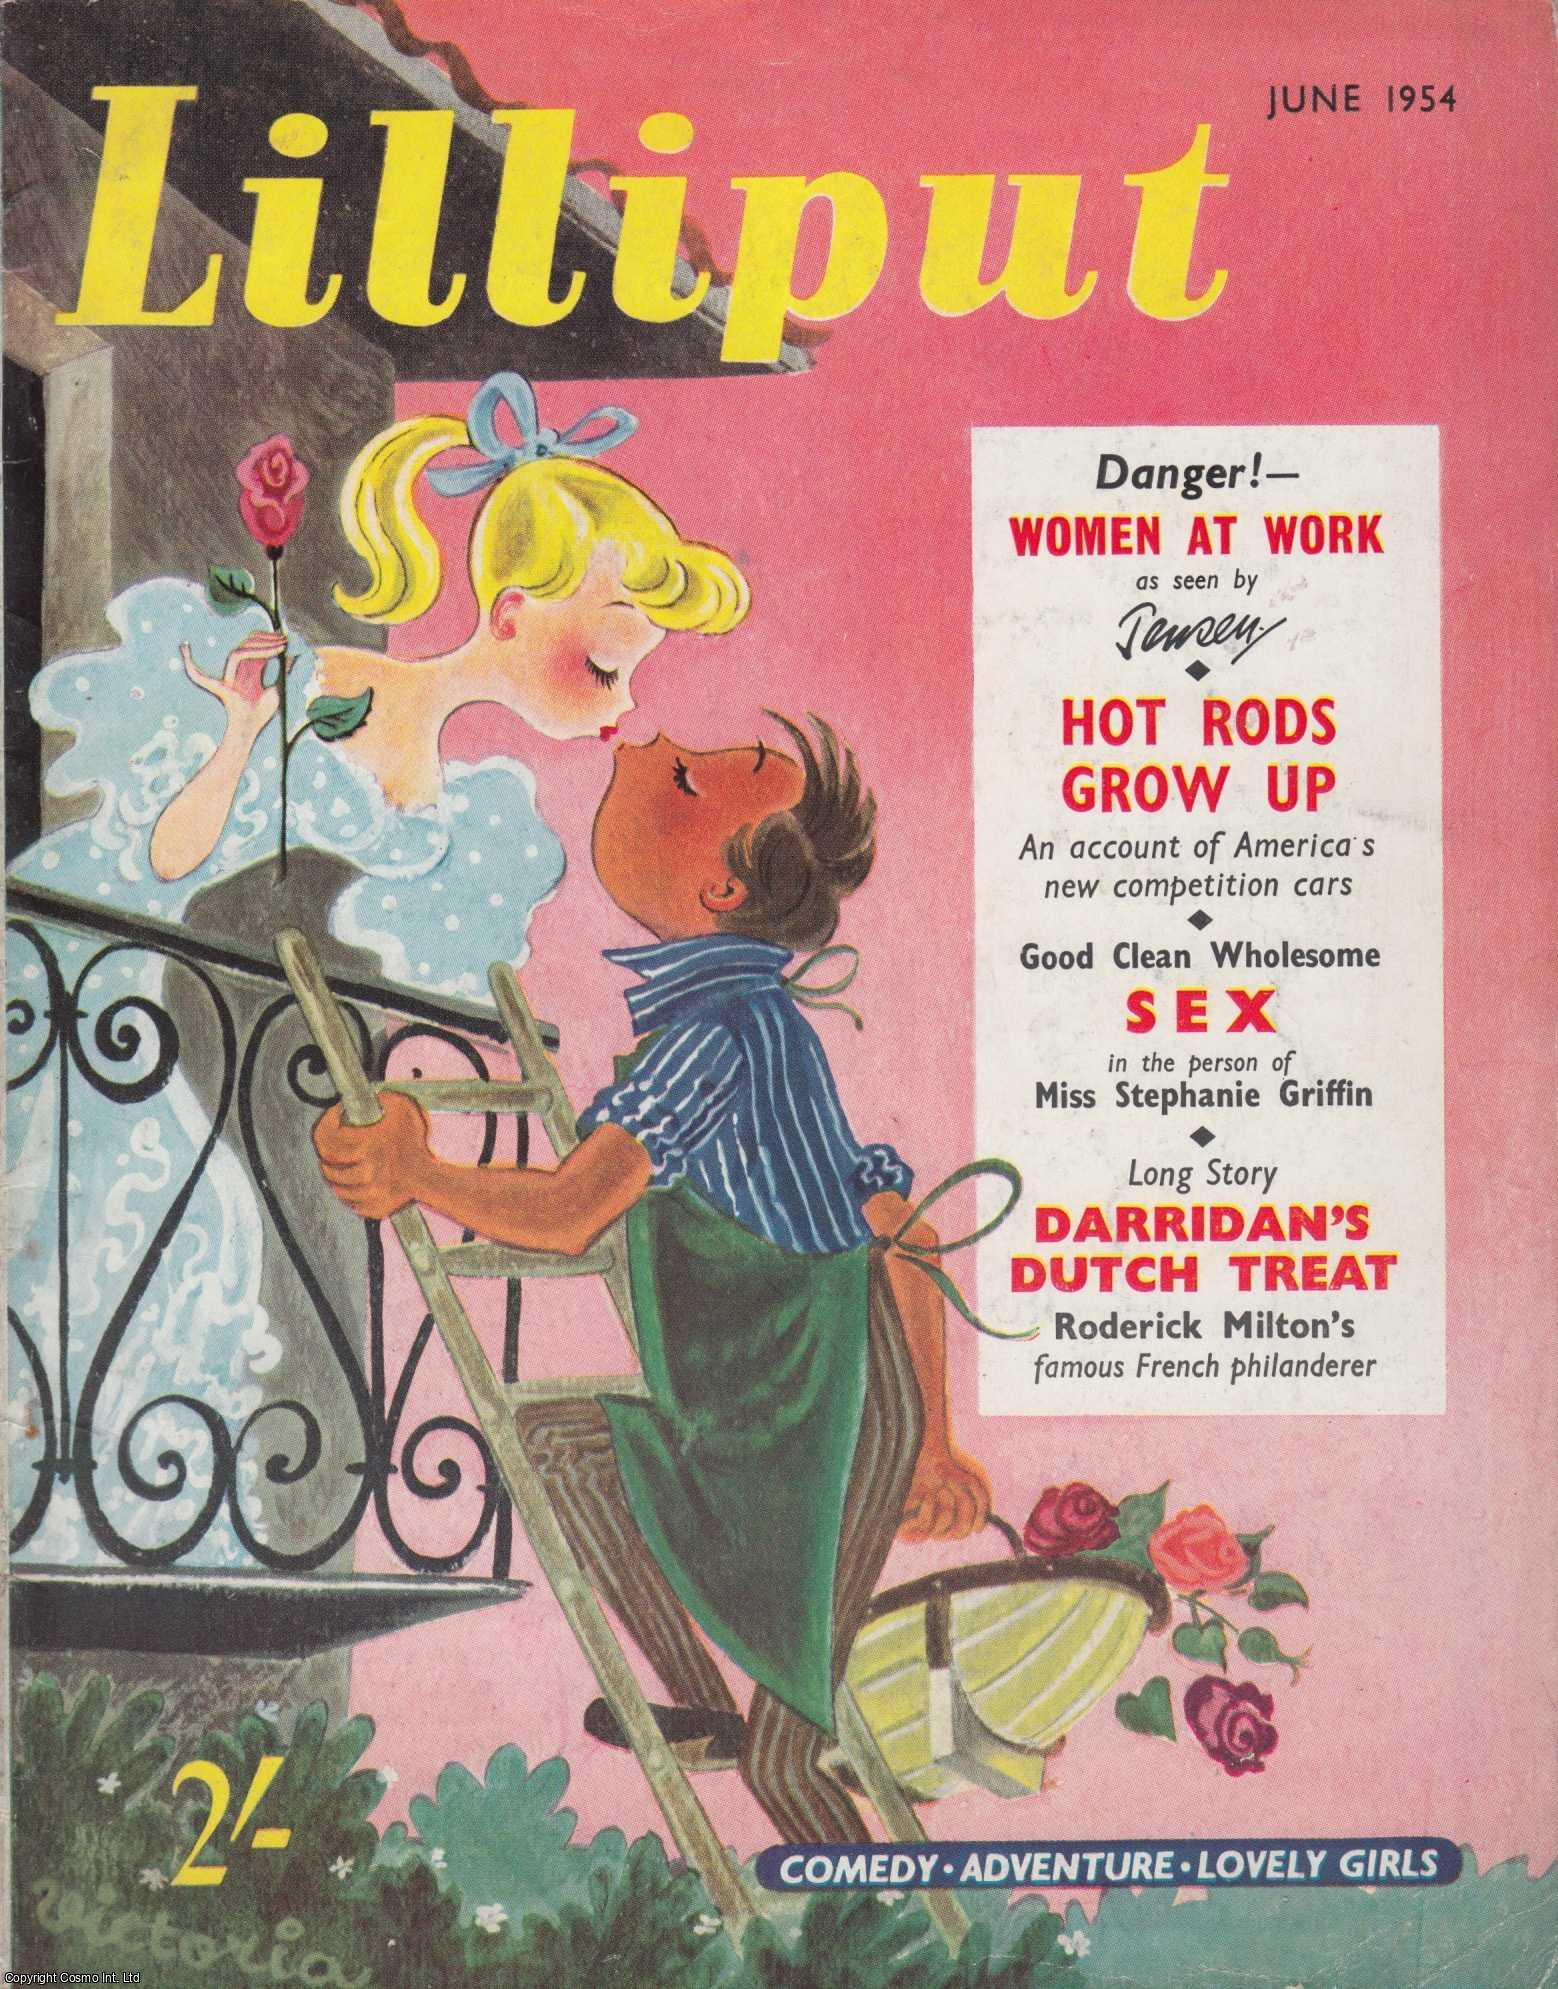 Lilliput - Lilliput Magazine. June 1954. Vol.34 no.6 Issue no.204. Raymond Sheppard drawings, Roderick Milton story 'Darridan's Dutch Treat', and other pieces.